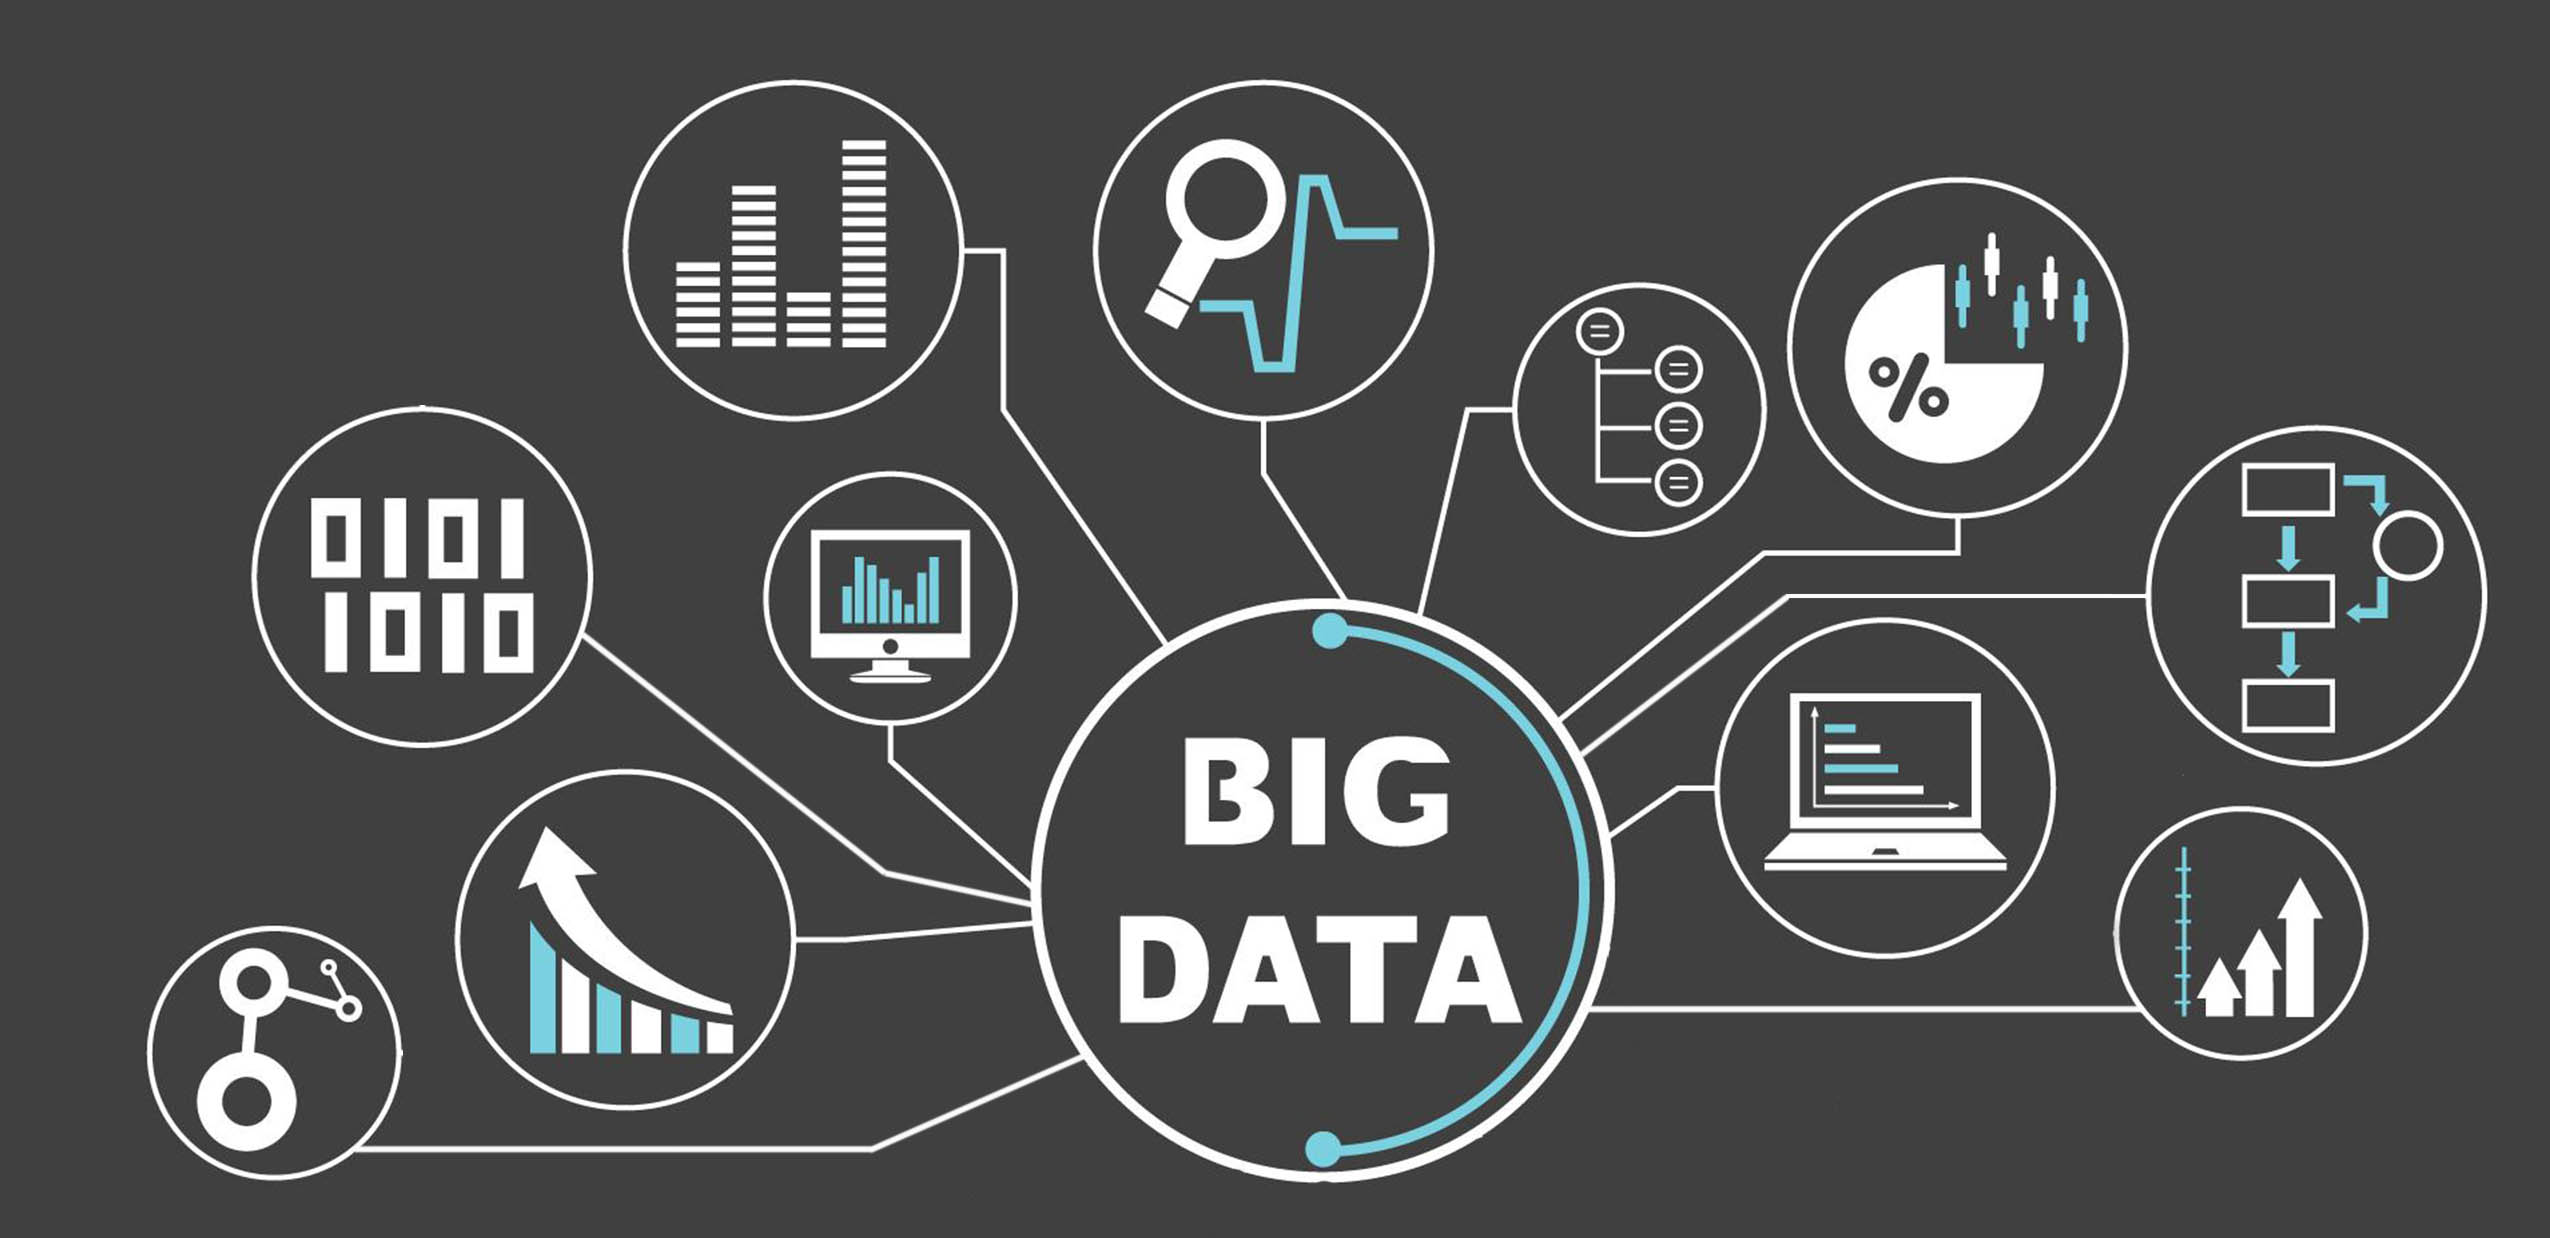 Navigation around Big Data; Its Threats and Solving Our Leading Challenges.